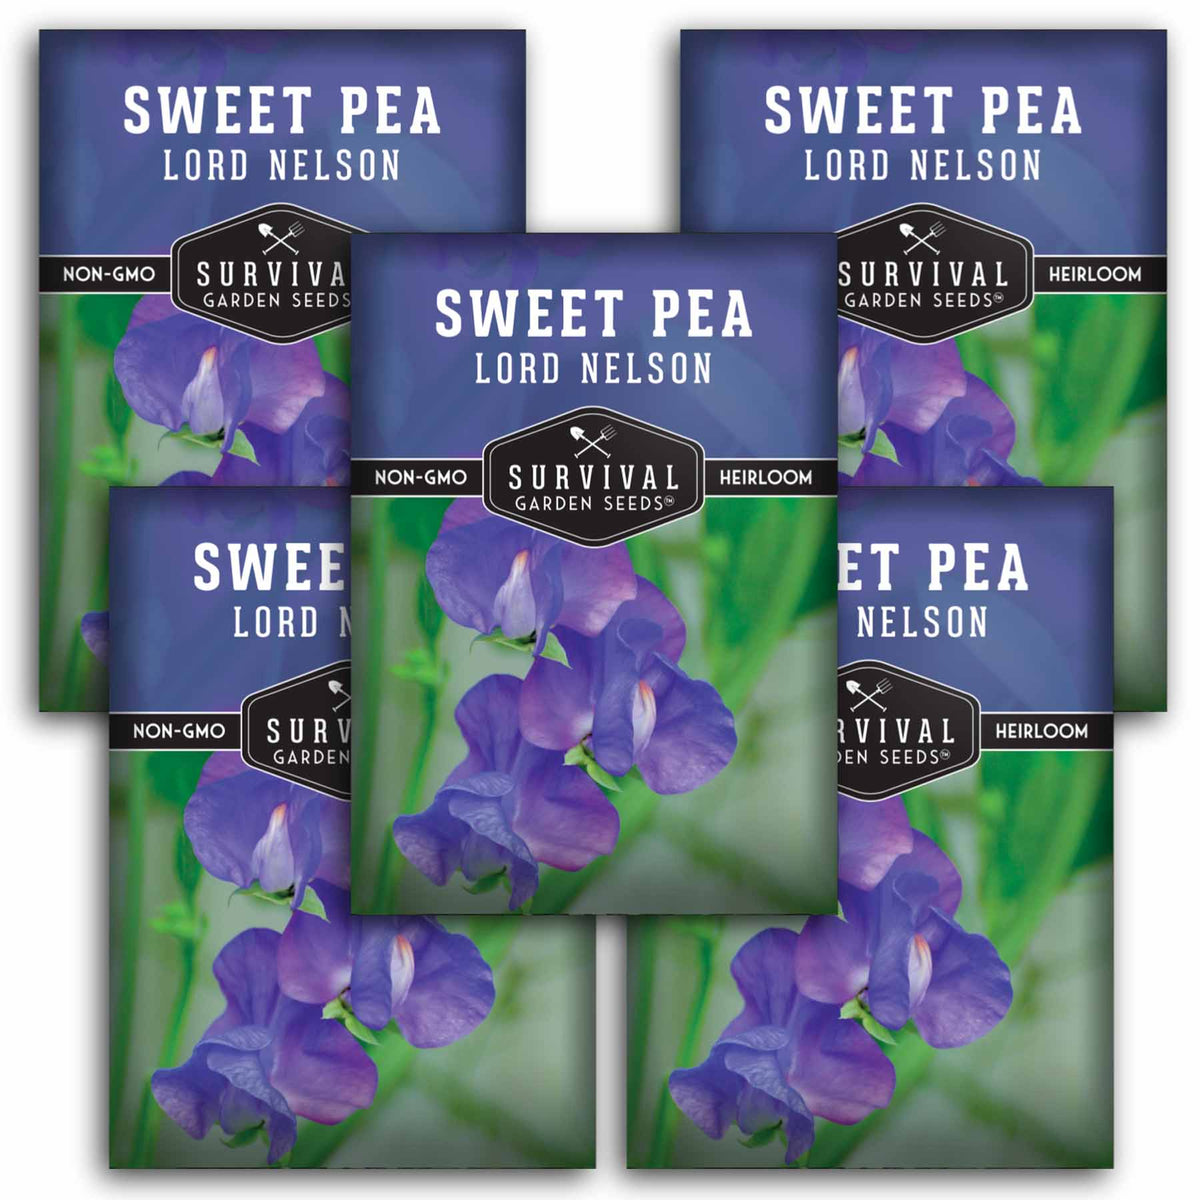 5 packets of Lord Nelson Sweet Pea seeds